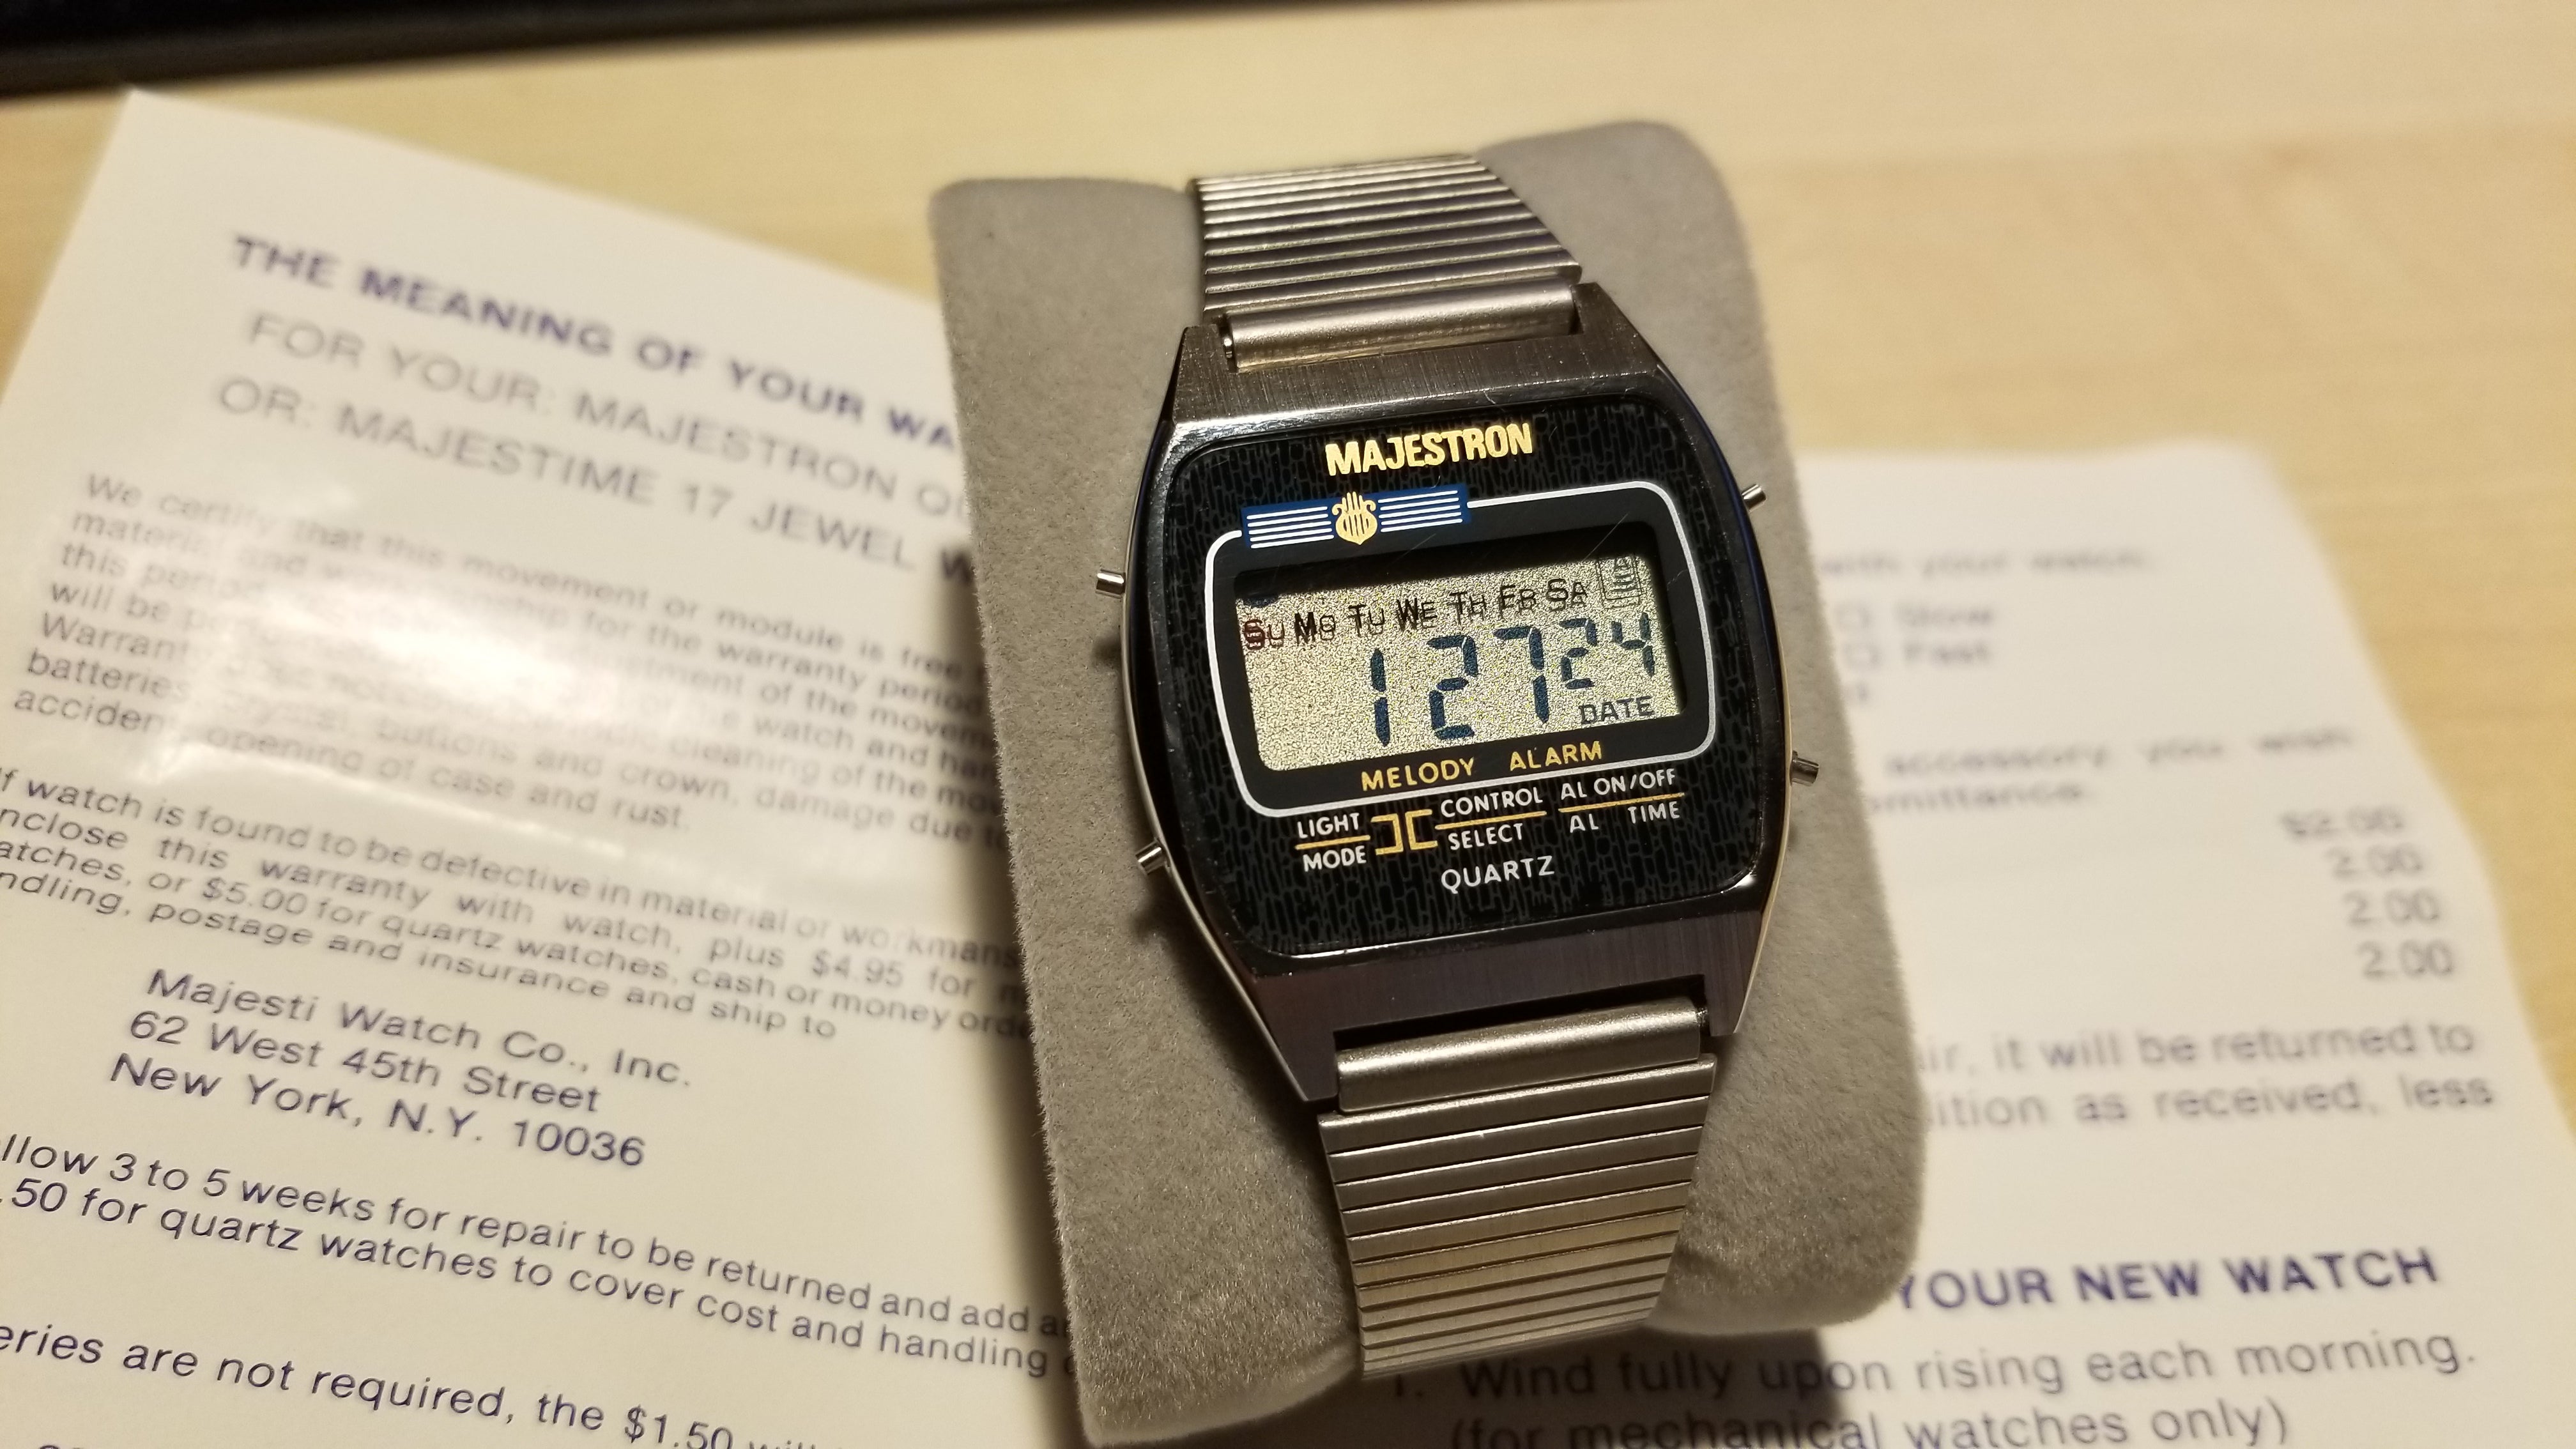 Need to Find more details about this Vintage (late 1970s) Digital ULTRA  THIN Majestron Quartz Watch | WatchUSeek Watch Forums